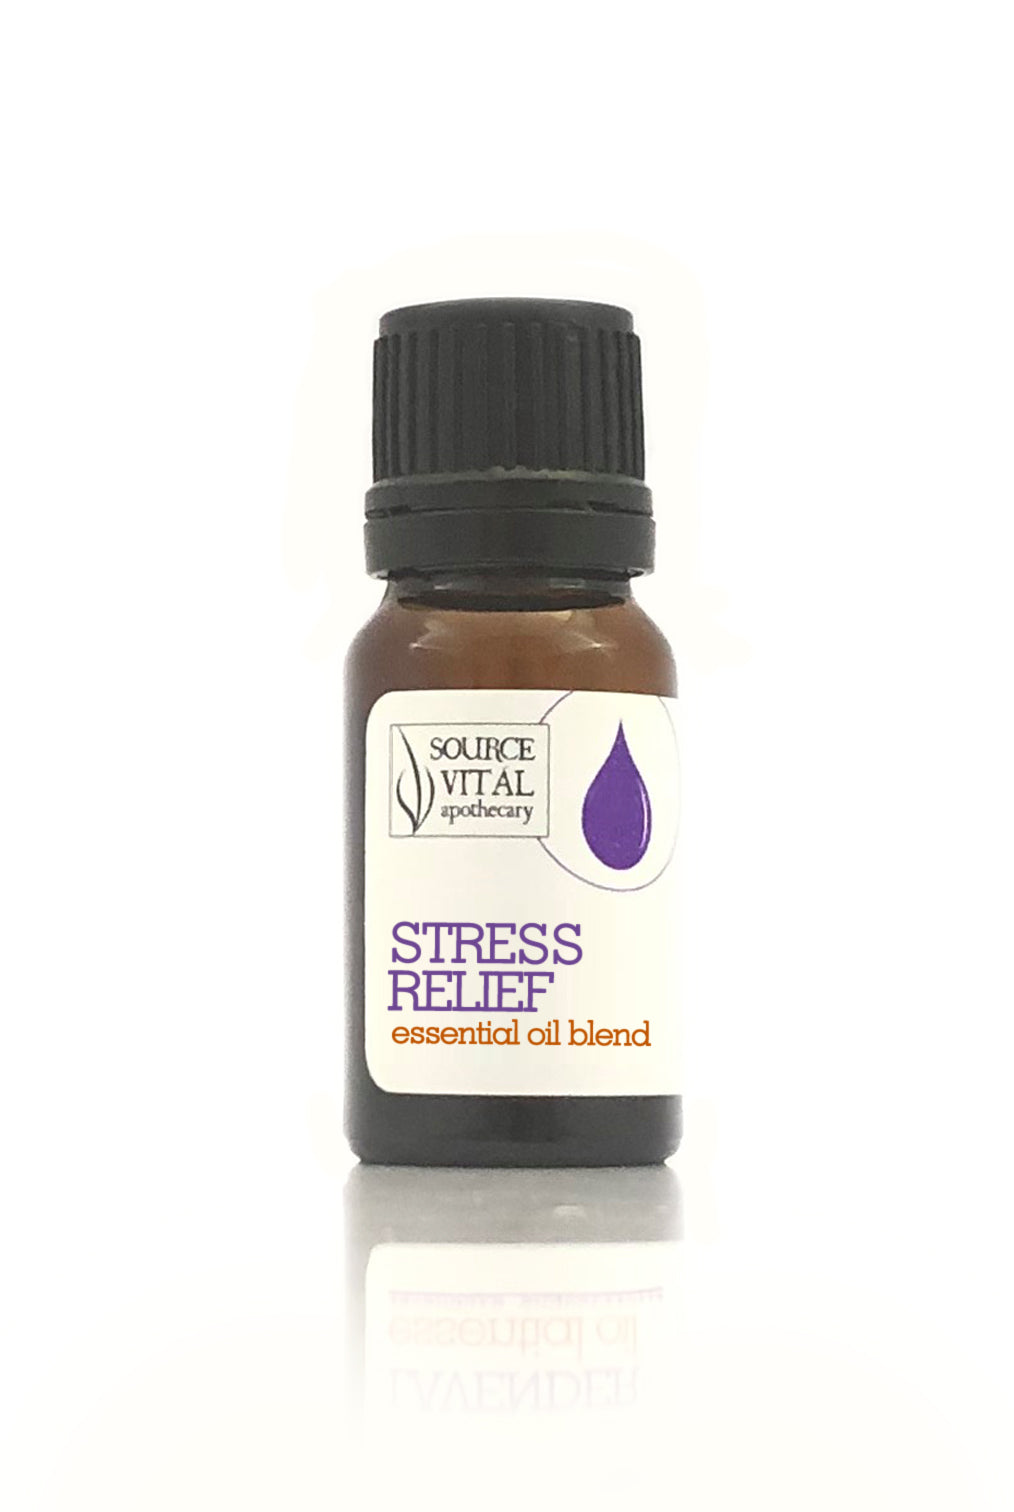 Calm Essential Oil Stress Relief Relaxation Gifts For Women Aromatherapy  Oils Body Care Drops for Fatigue